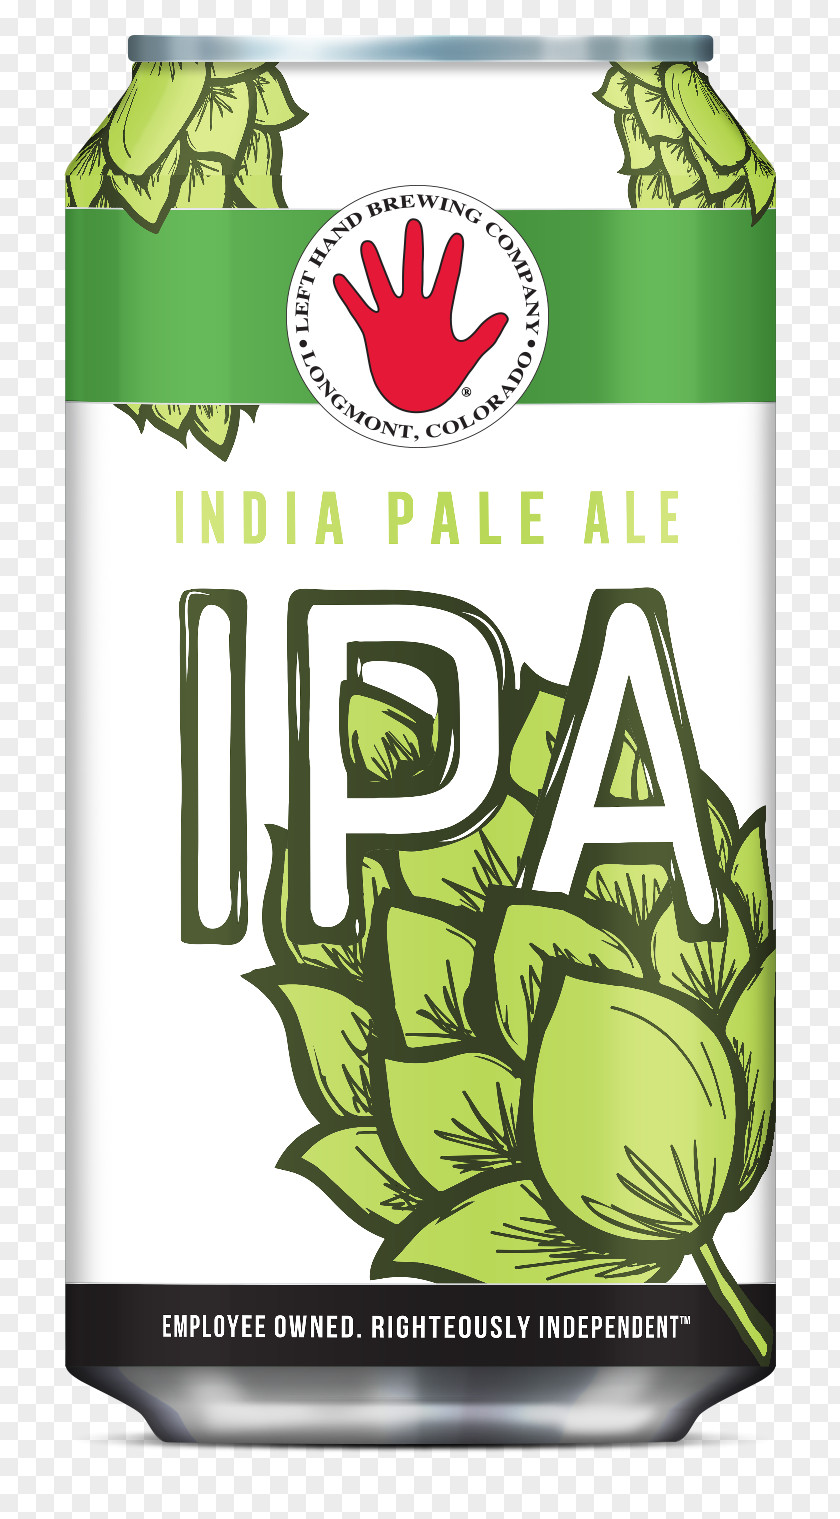 Beer Left Hand Brewing Company India Pale Ale Porter PNG